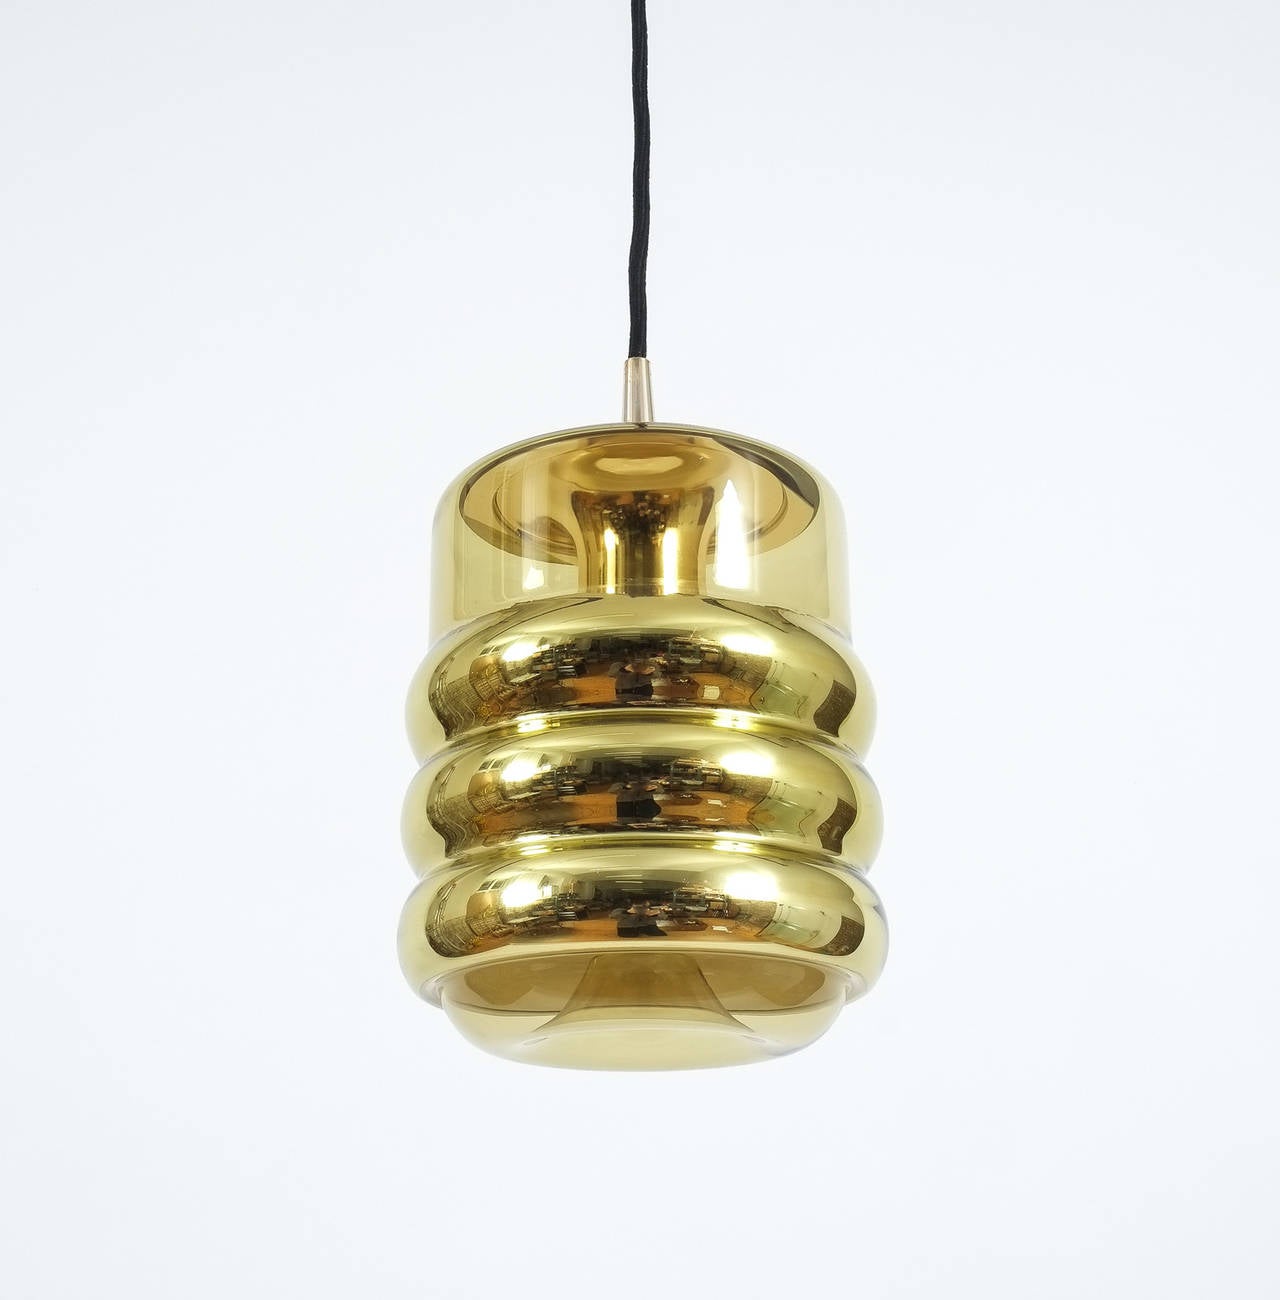 Nice set of three identical glass pendants by Staff or Germany featuring slightly yellowish glass with a golden metallized mirror effect. Each light takes up to 75W. The cord wire can be adjusted in length according to your requirements.